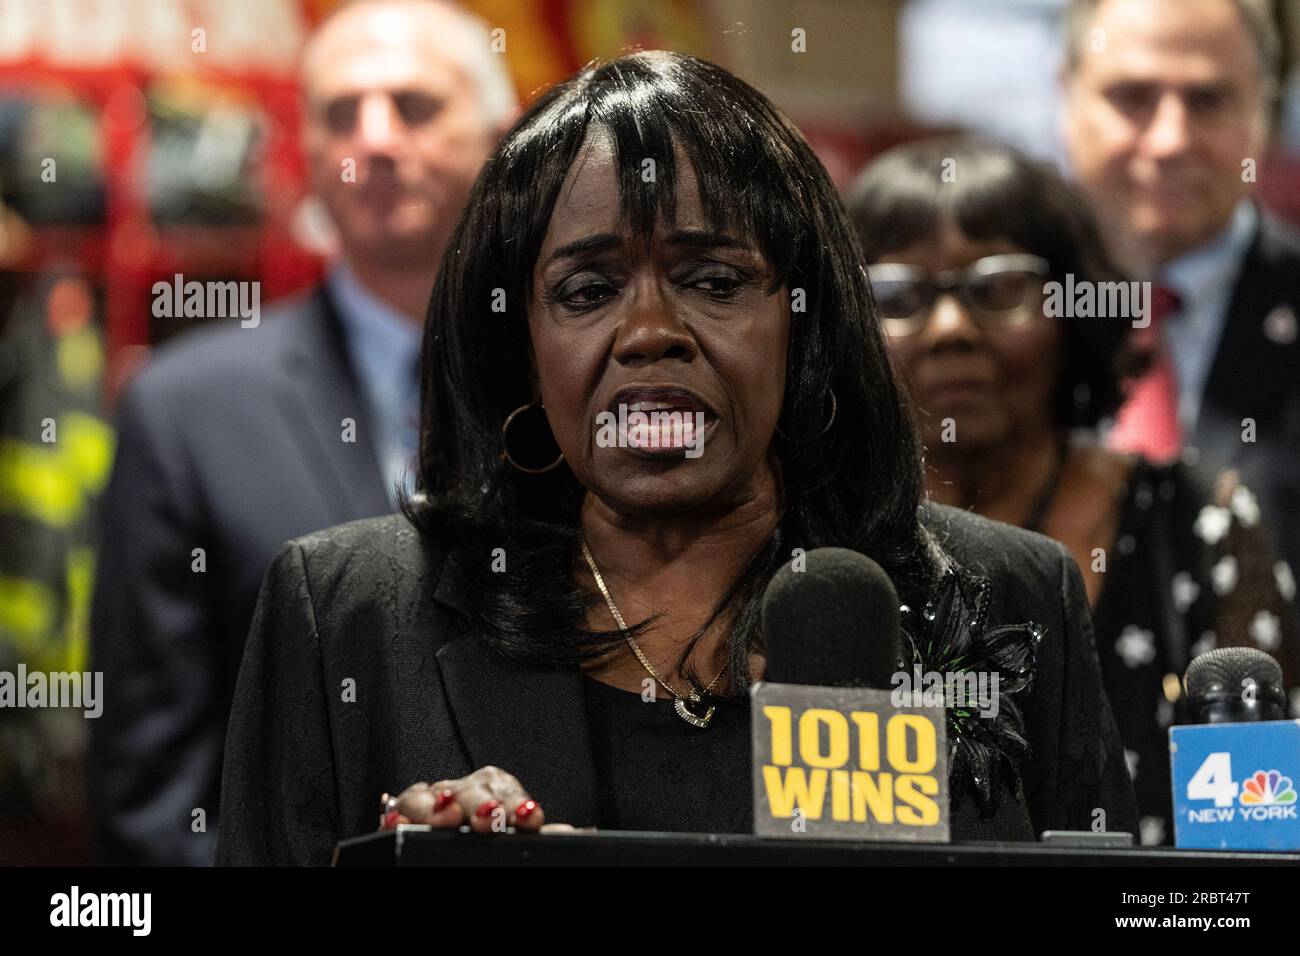 New York, USA. 10th July, 2023. Glwendolyn Webb speaks at press conference on anniversary of Children's Crusade or Children's March as it is known at FDNY Engine 1, Ladder 24 station in New York. March was held in Birmingham, Alabama on 2 - 10 May, 1963 and was attended by more than 5,000 school children, 3 of them joined this press conference: Gloria Washington, Gwendolyn Gamble, Gwyndolyn Webb. Members of FDNY at the time stood up against the City of Birmingham fire department using force against children. (Photo by Lev Radin/Pacific Press) Credit: Pacific Press Media Production Corp./Alamy  Stock Photo